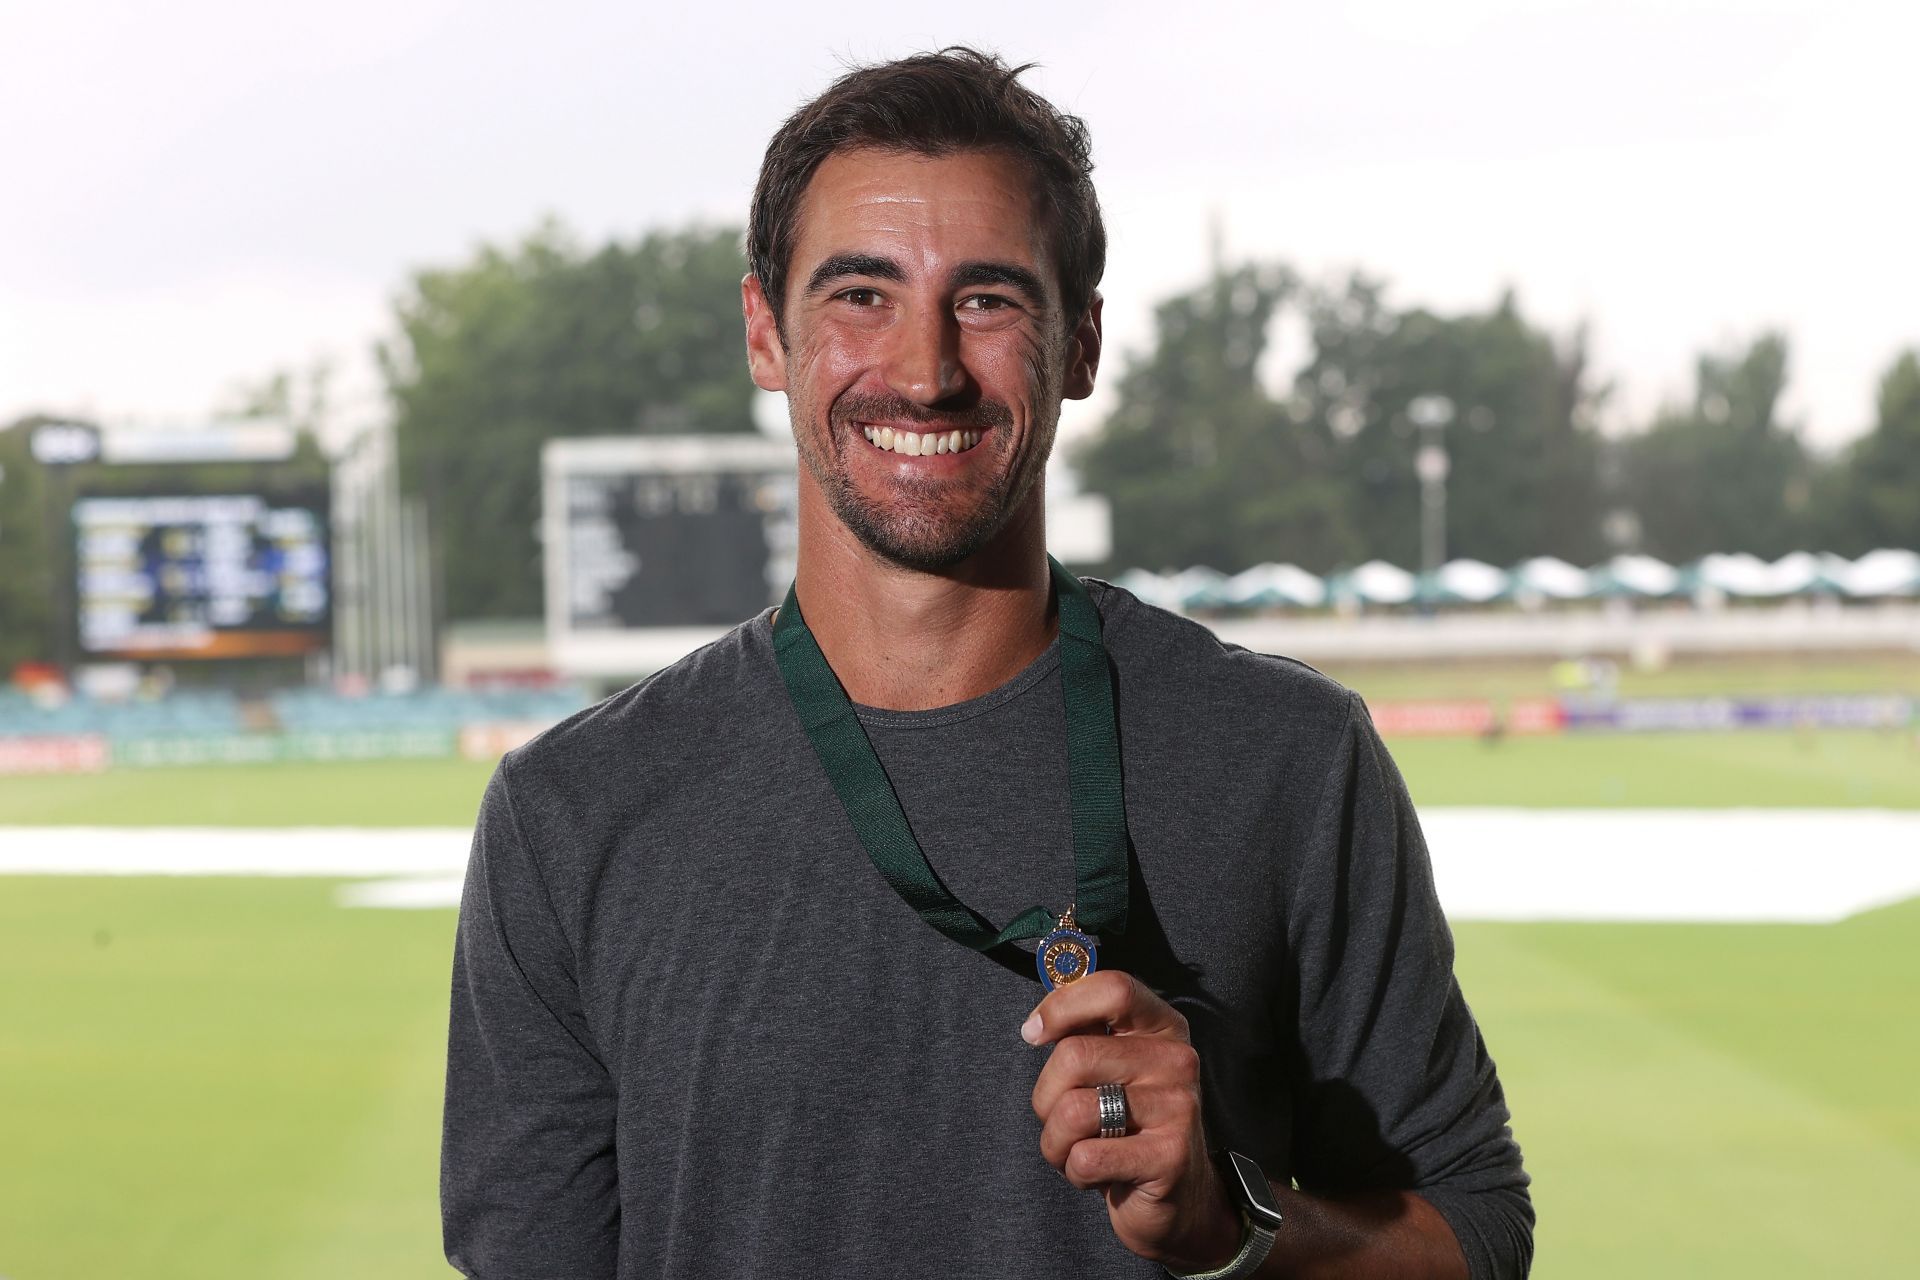 Mitchell Starc won the Allan Border medal for the first time in his career